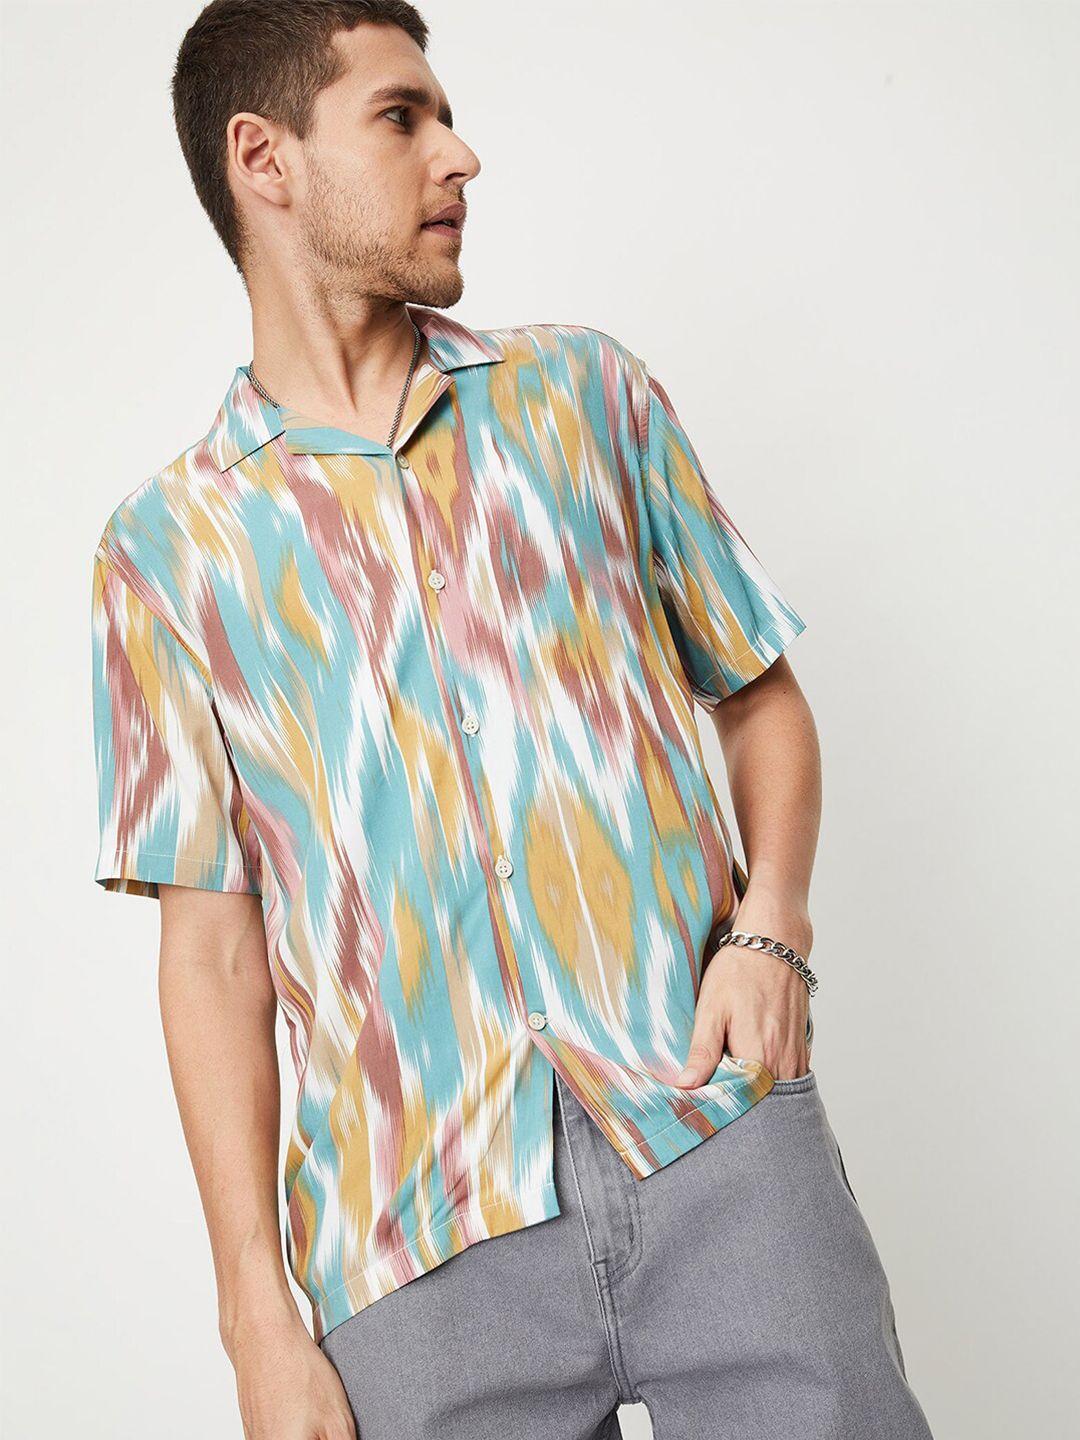 max men opaque turquoise blue printed casual shirt